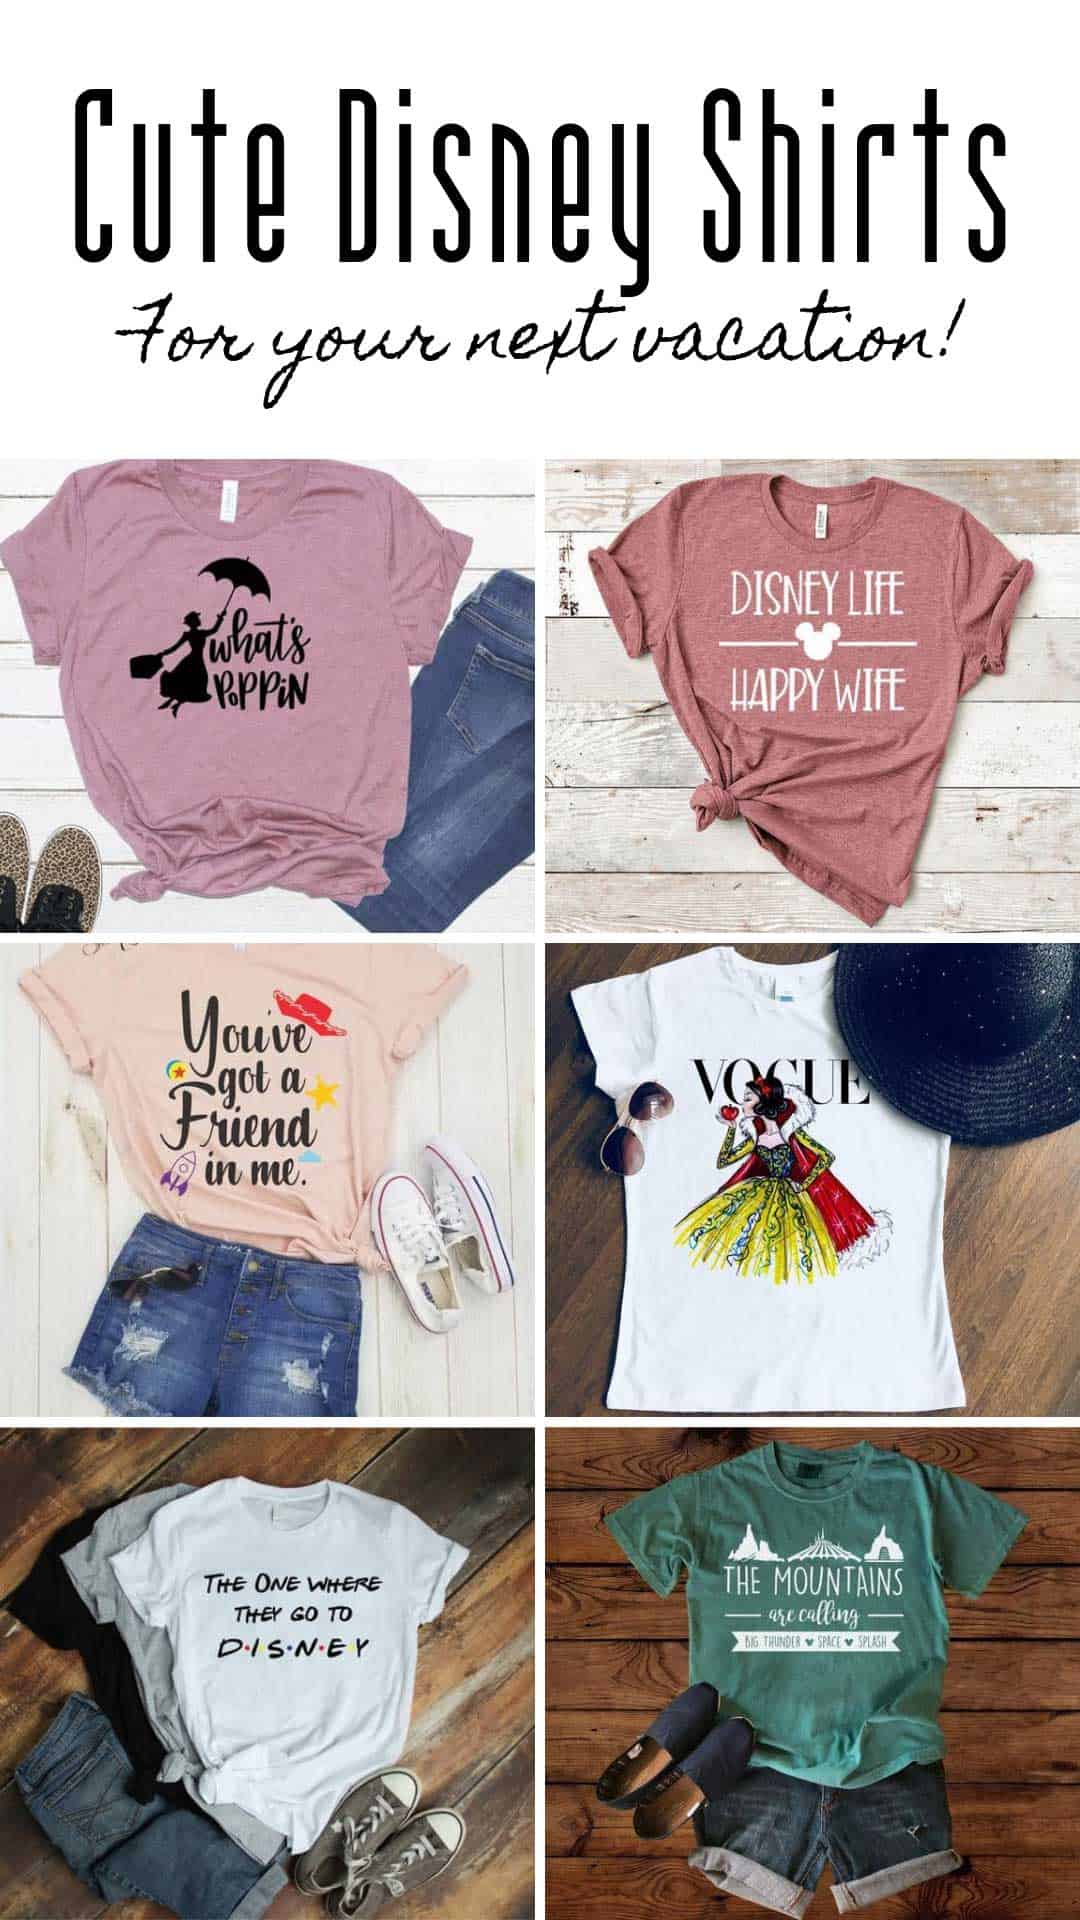 These cute Disney shirt ideas are just what you need for your next Disney vacation - or just letting the world know how much you love Disney!